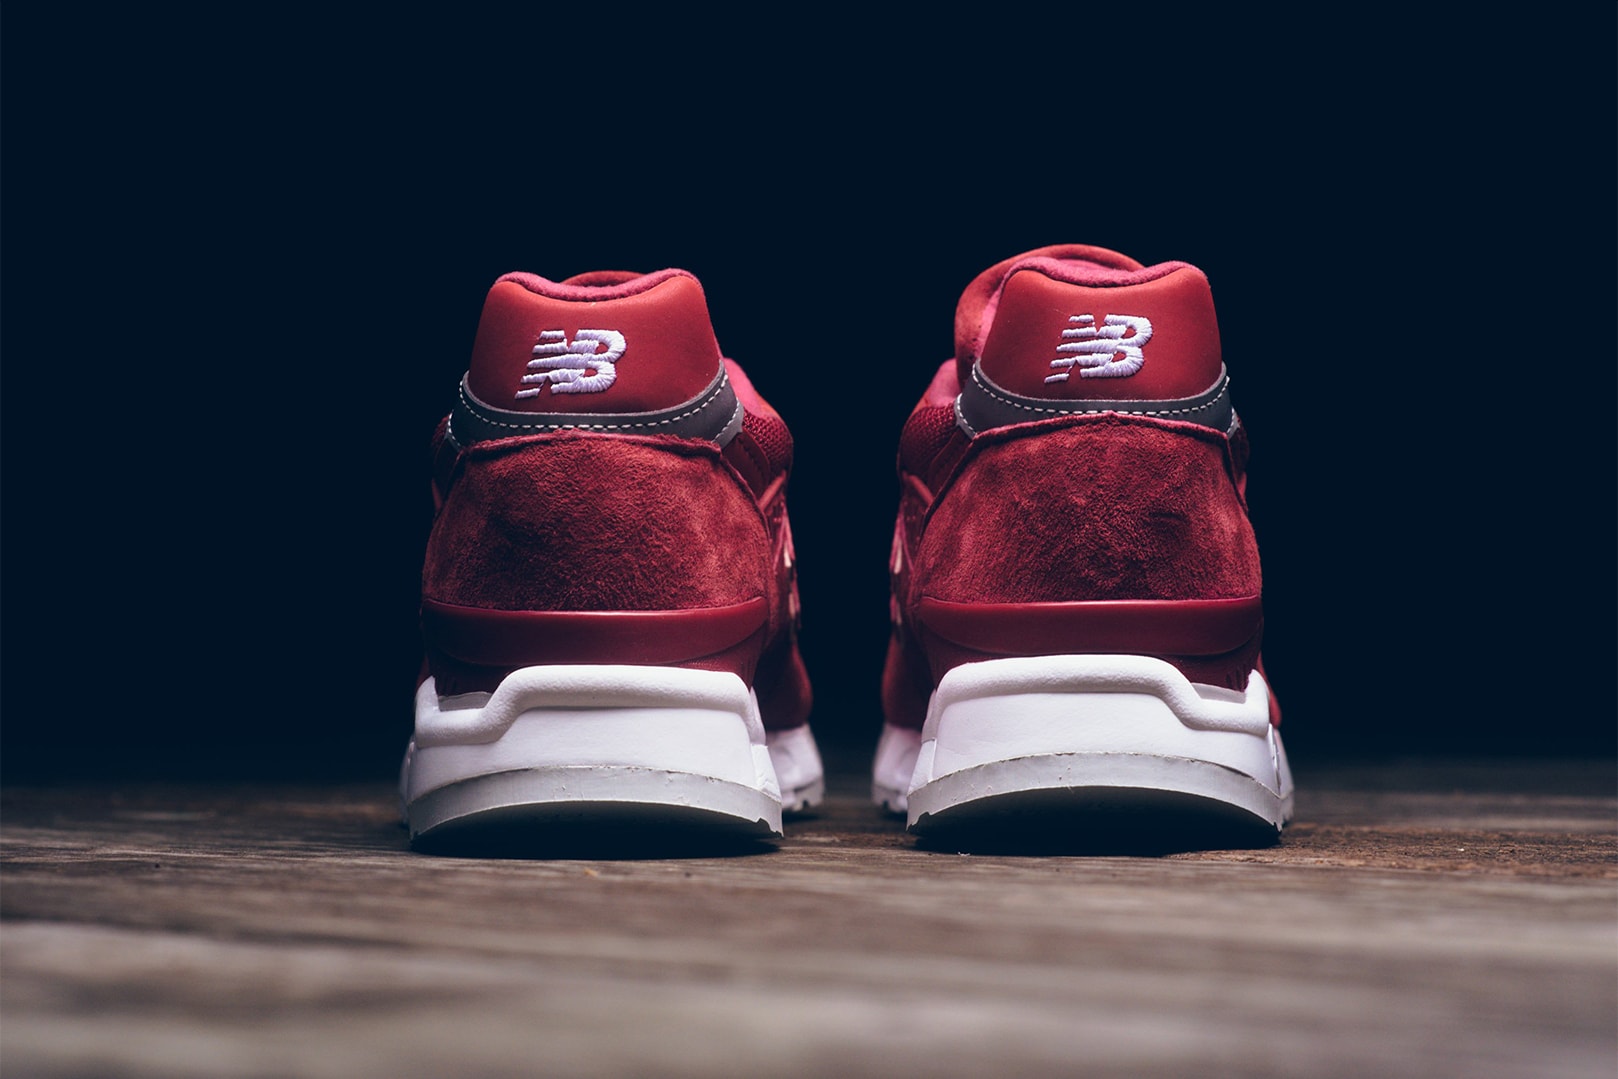 New Balance 998 RBE Red Details Womens Available Purchase Cop Buy Now Kicks Shoes Trainers Sneakers